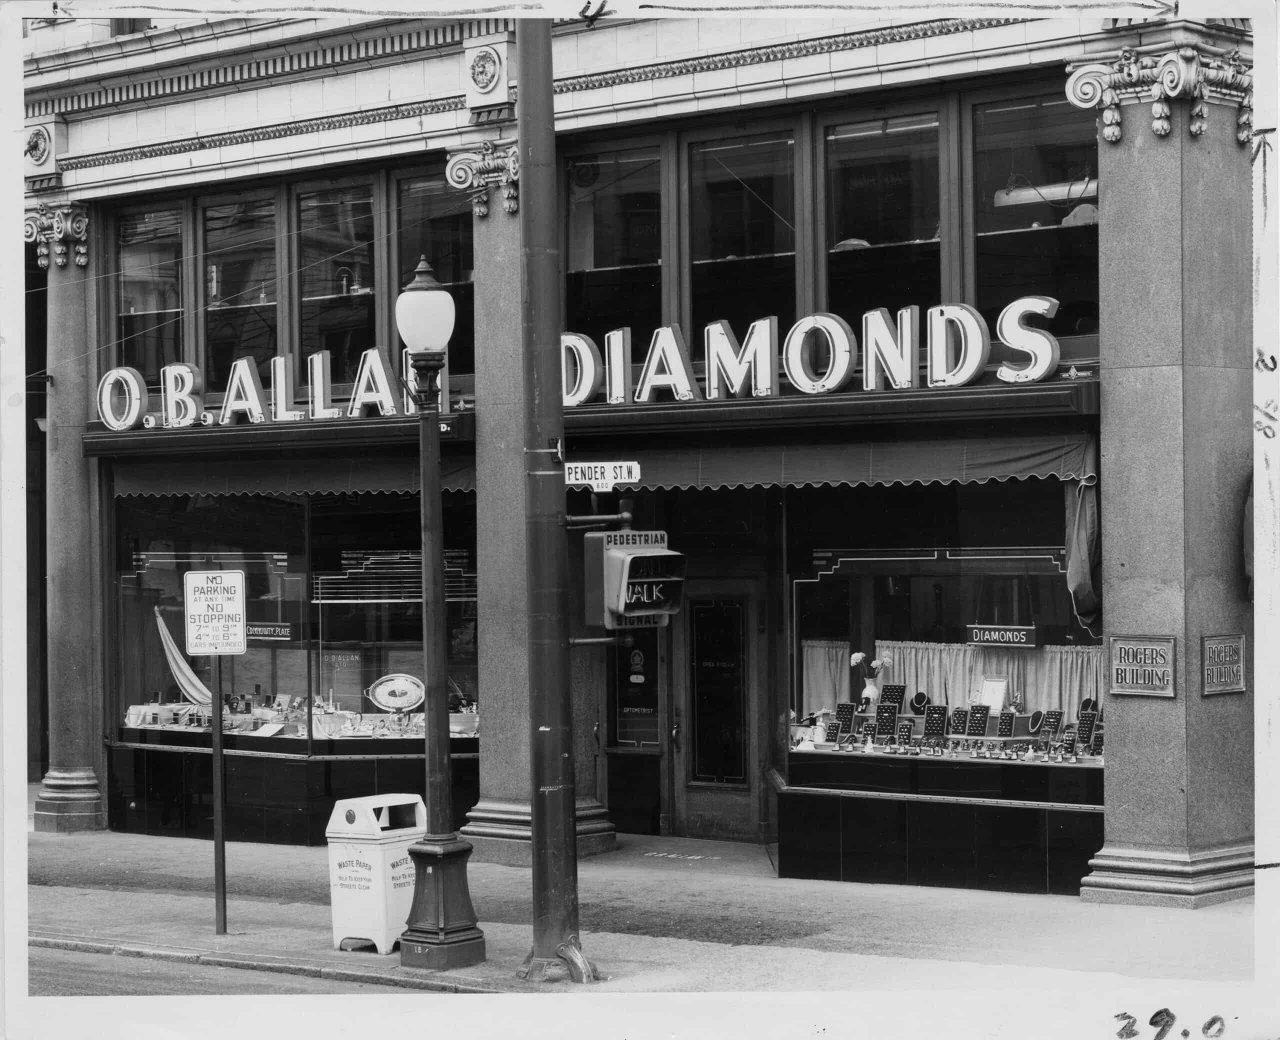 Exterior of O.B. Allan store, Pender St view, 1959. Source: City of Vancouver Archives 1385-15